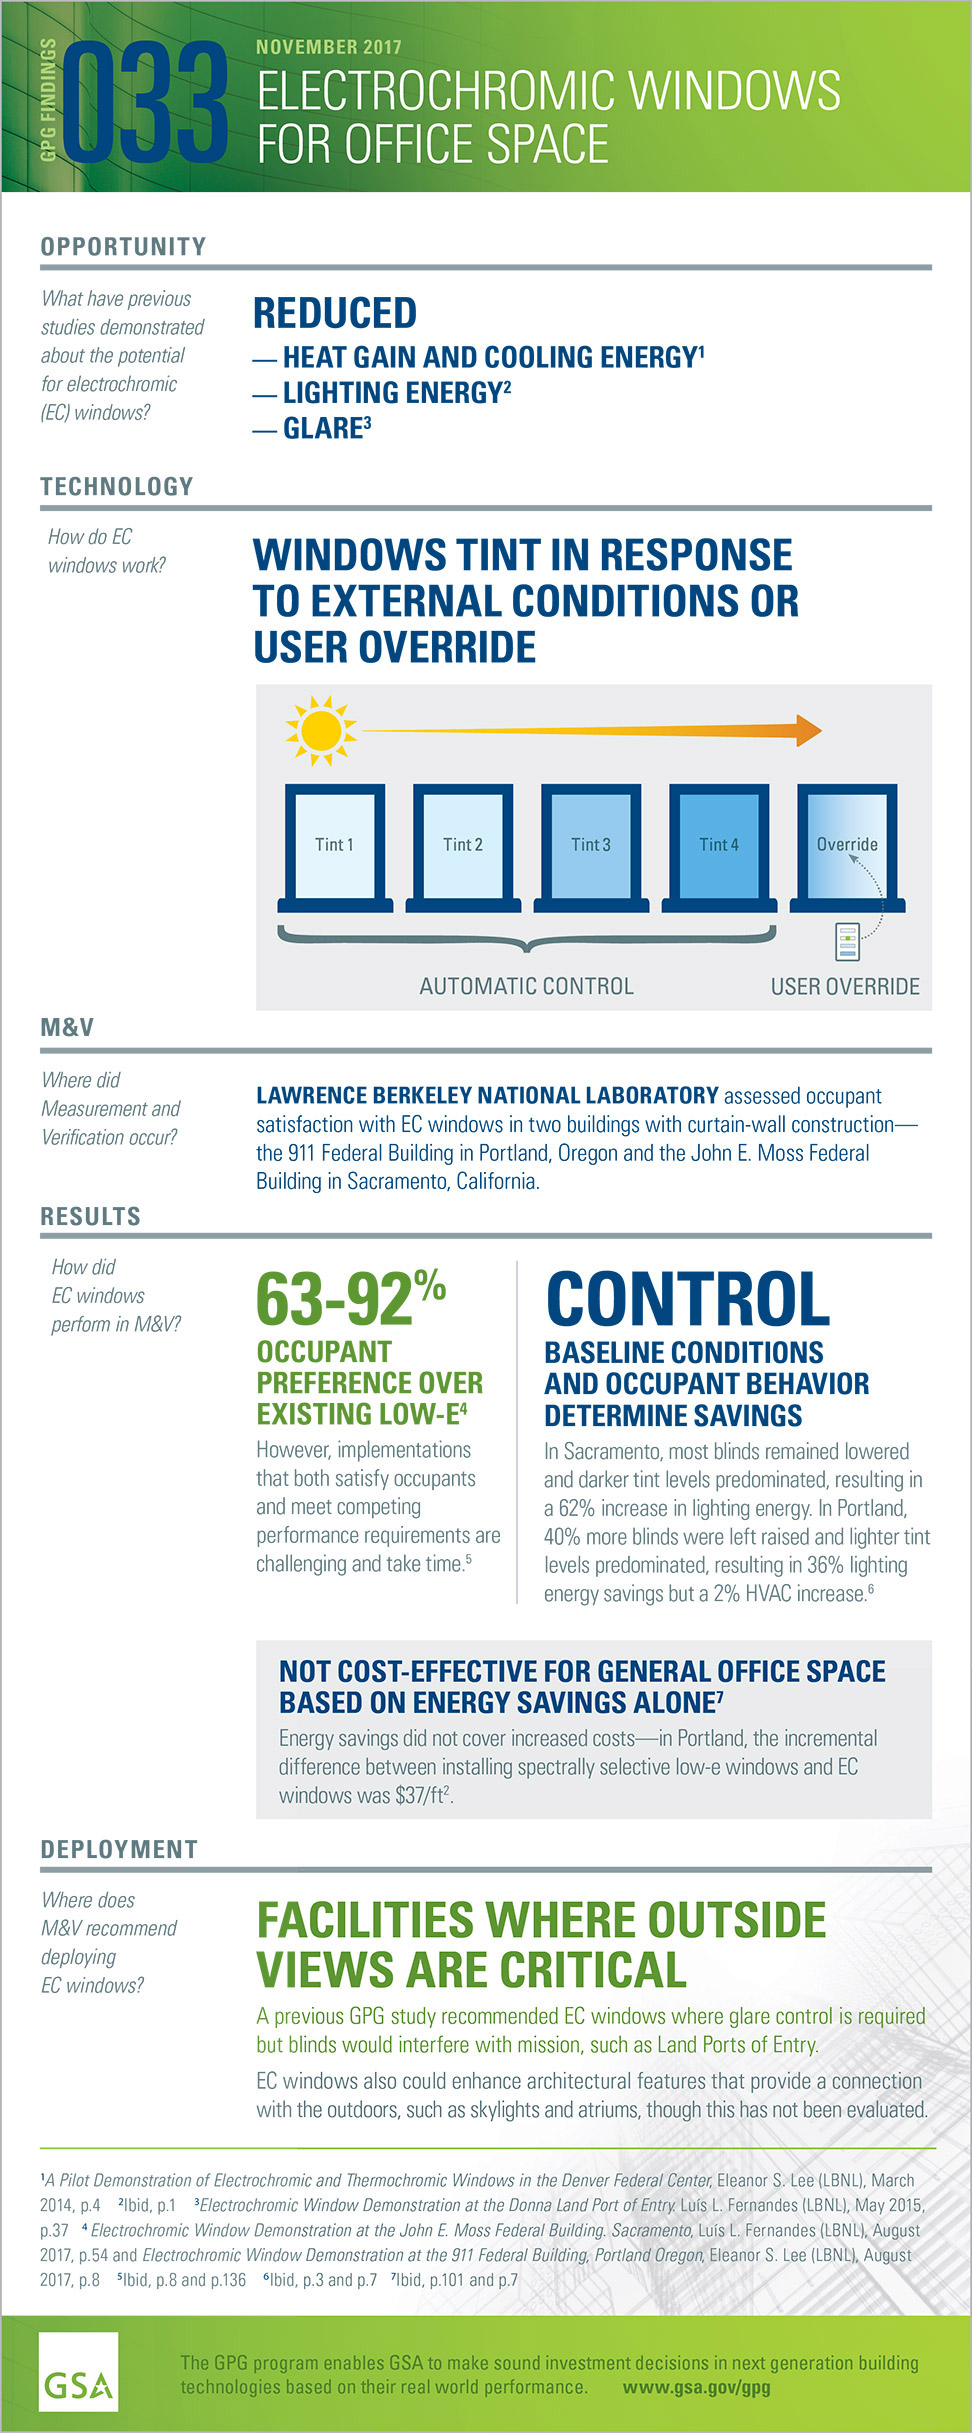 GPG Findings 033, November 2017, Electrochromic Windows for Office Space infographic